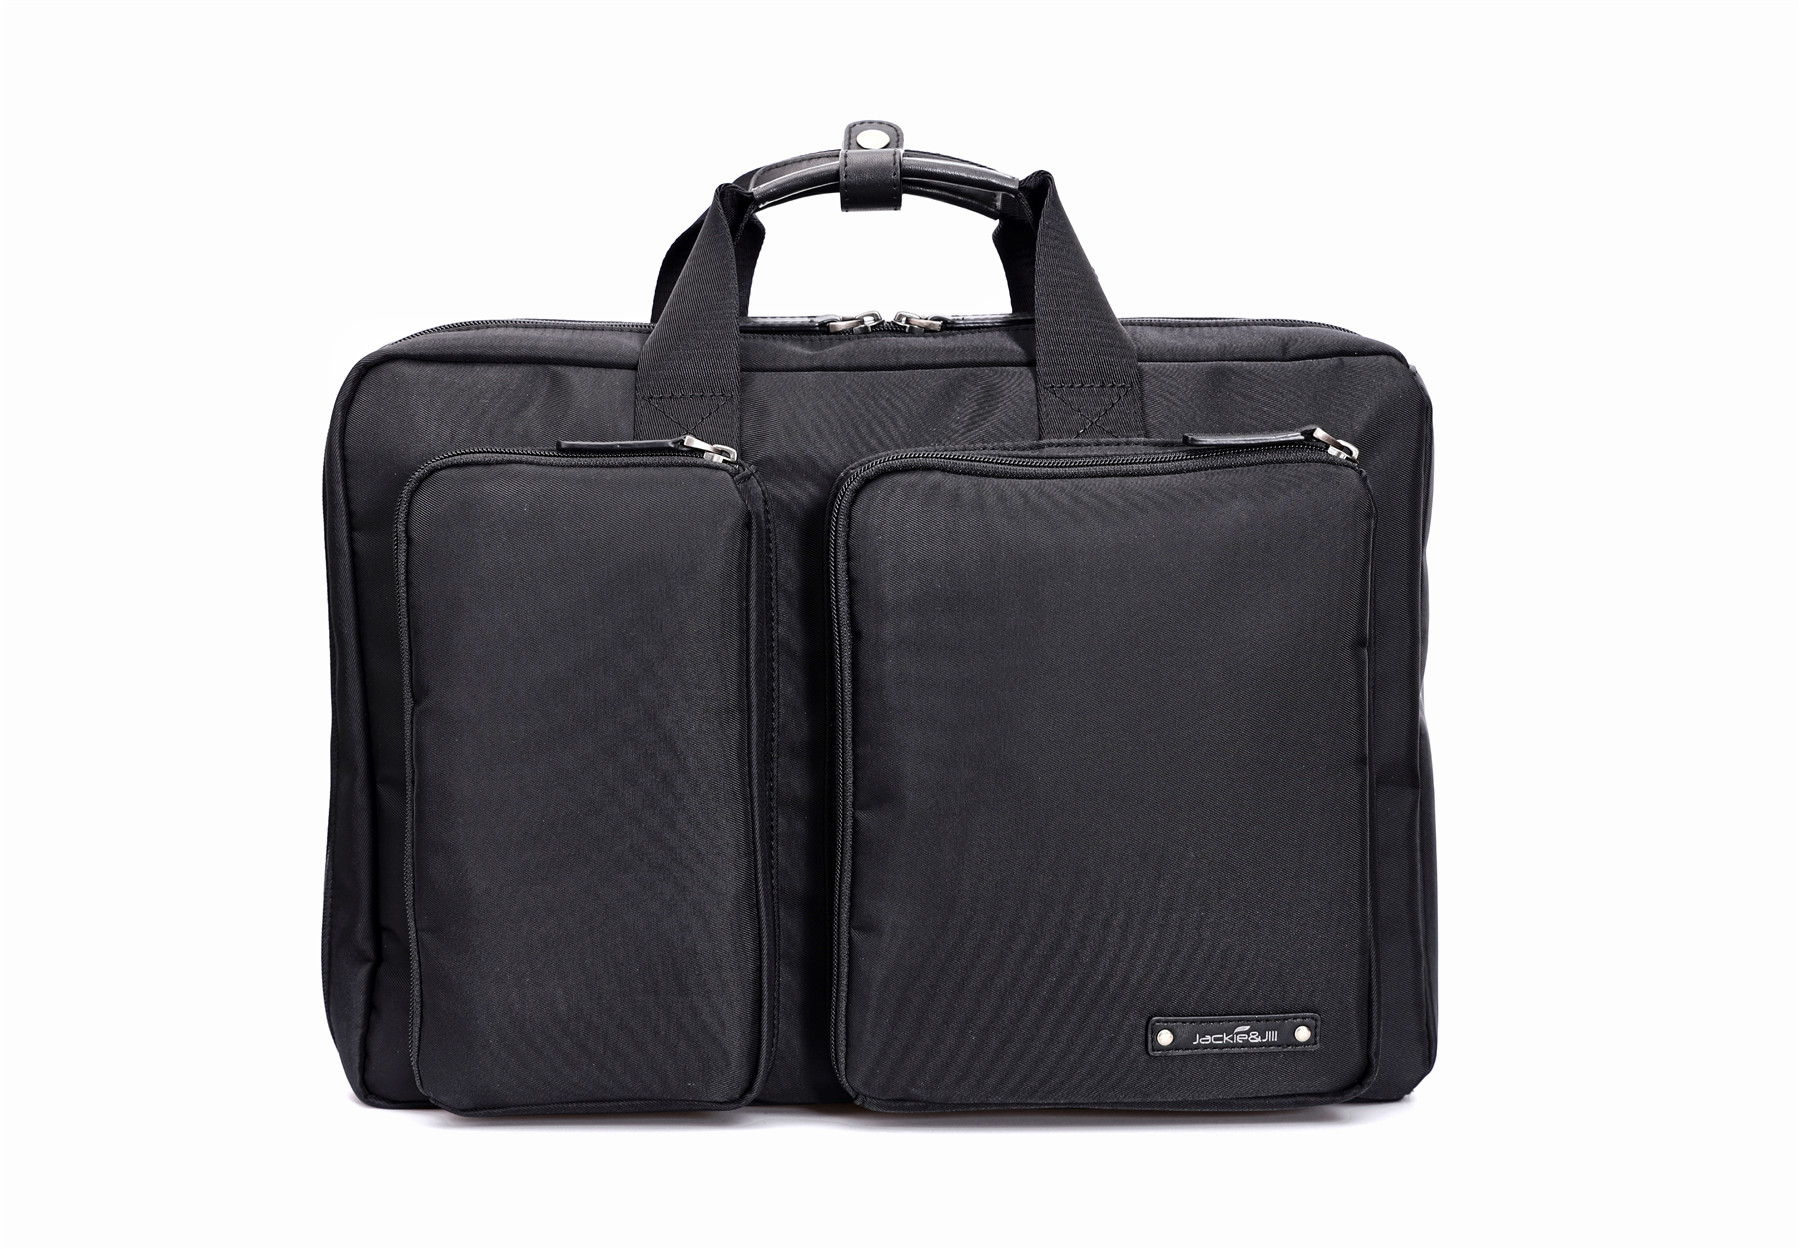 Briefcase nylon fabric multifunction business bag